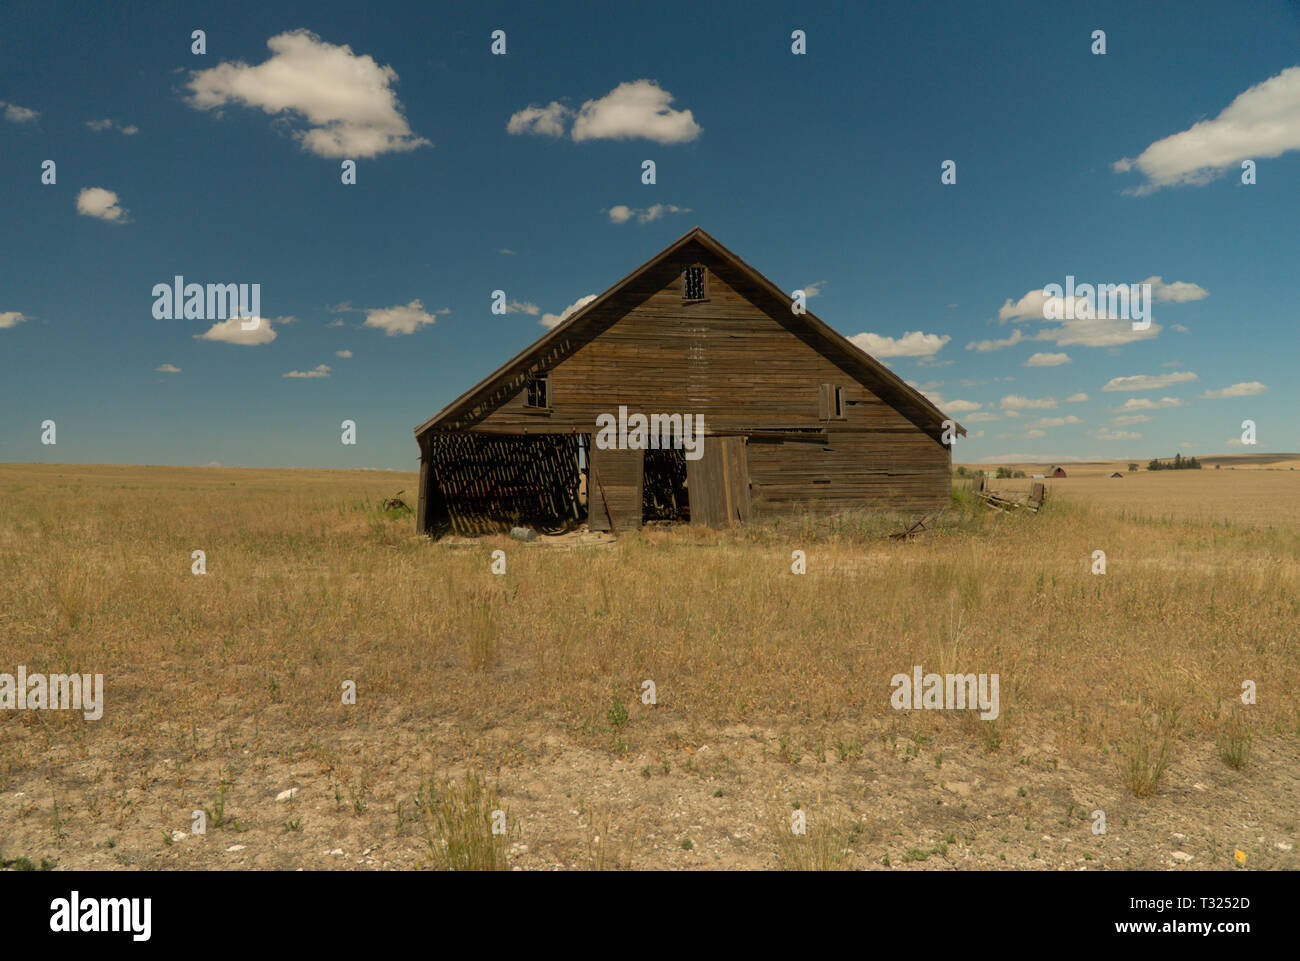 A Weathered Old Barn Stands Alone Against the Harsh Dry Climate Stock Photo